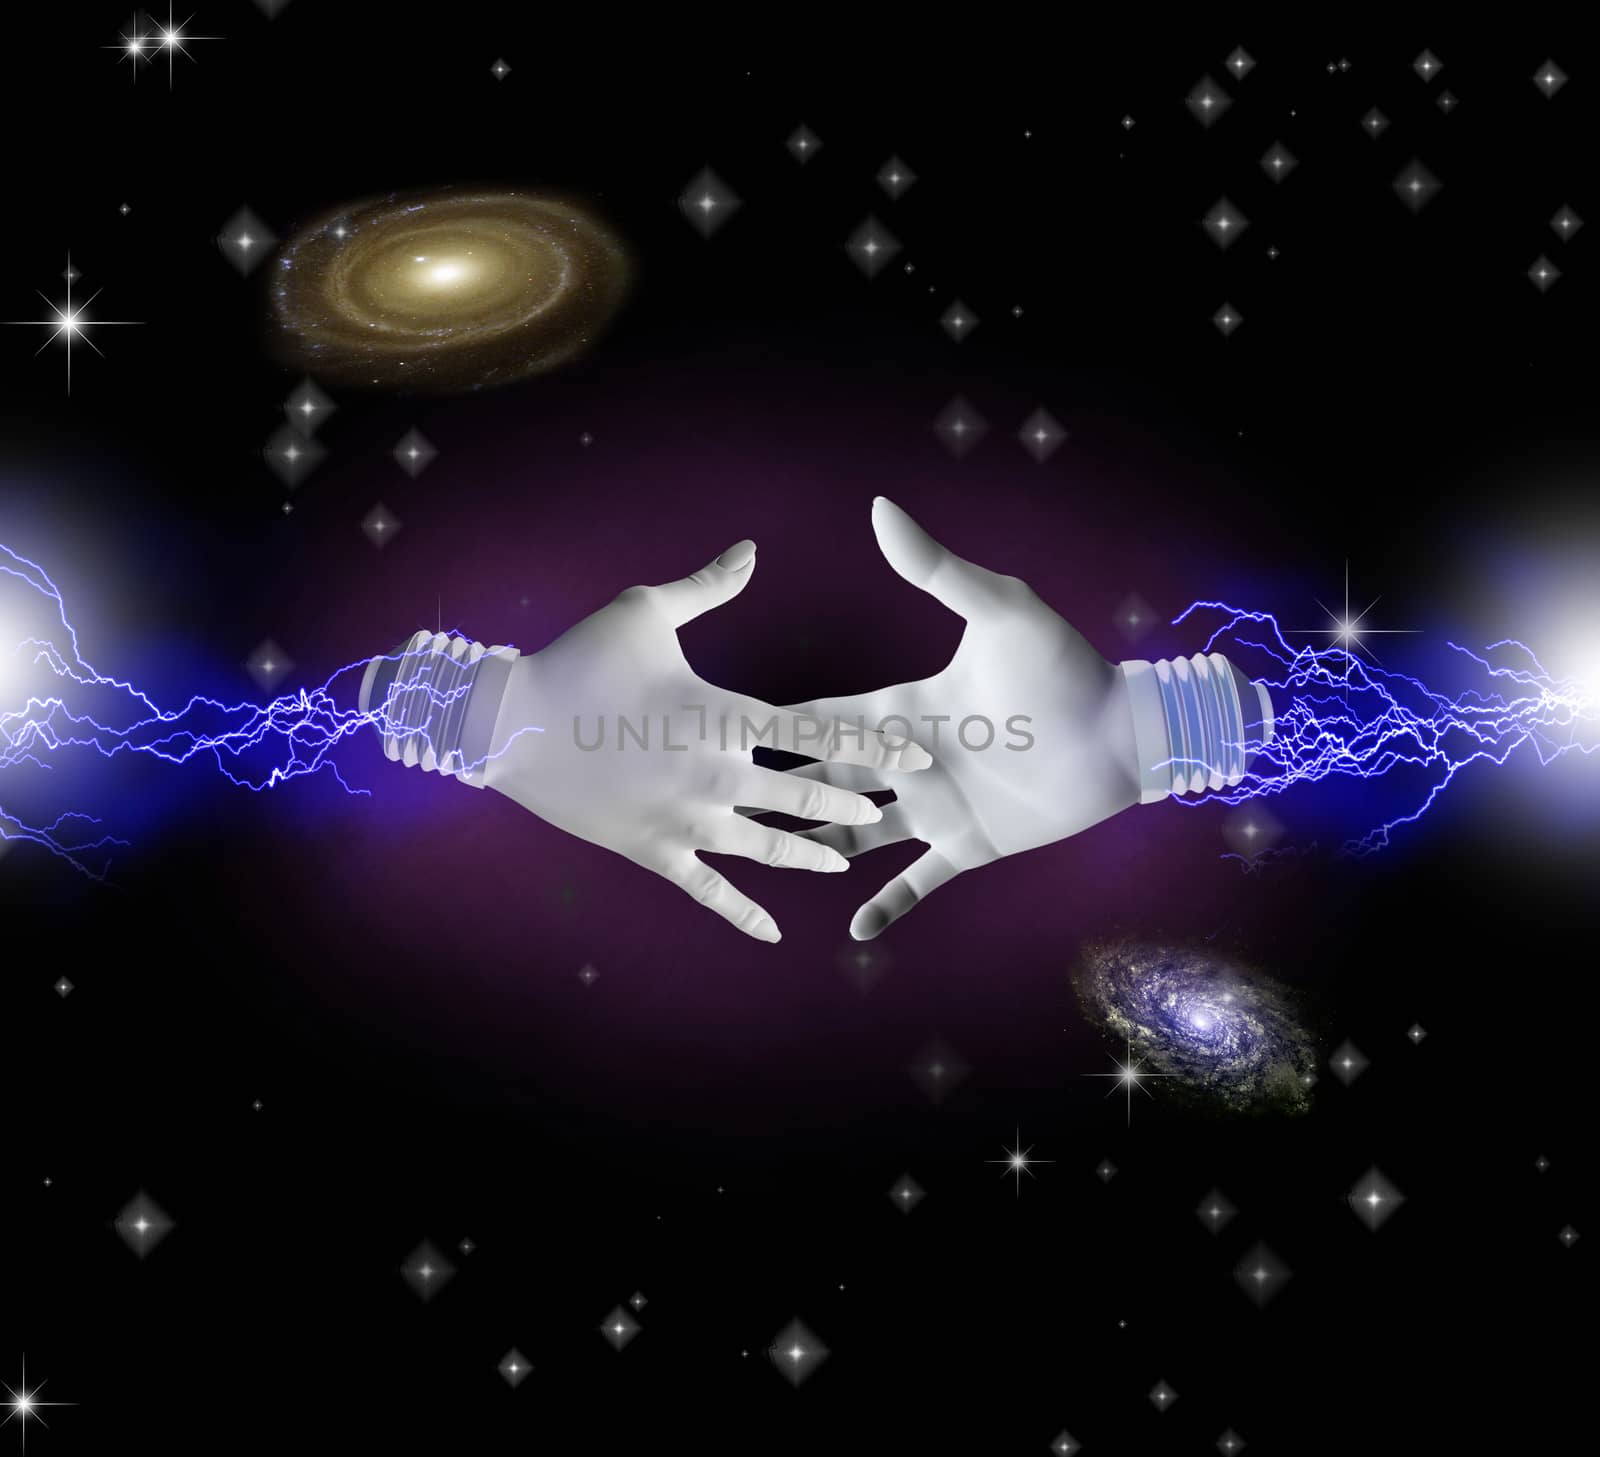 Hands reaching toward each other in space